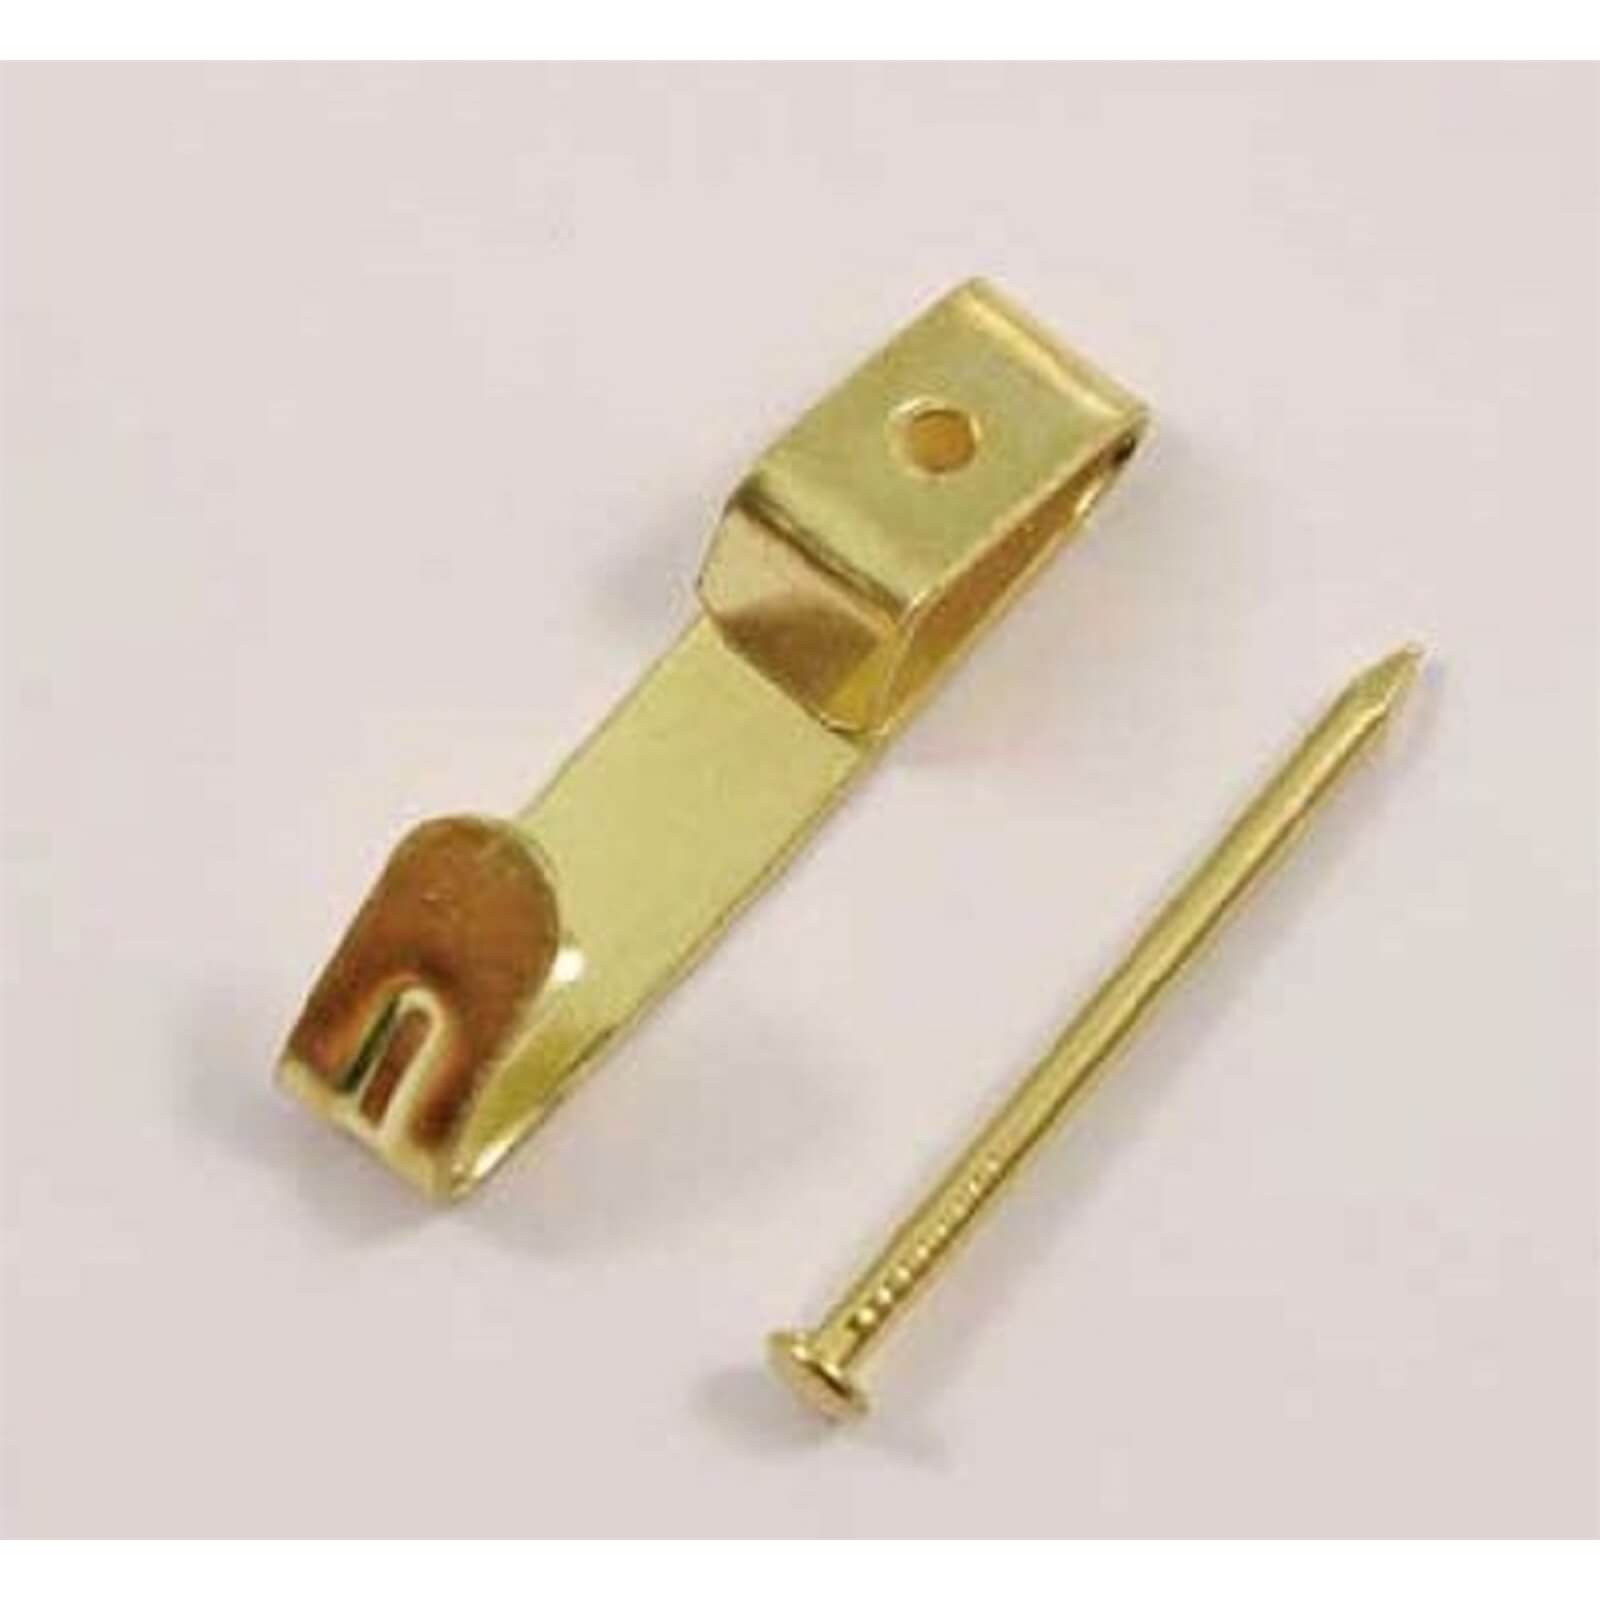 Photo of Small Picture Hook - Brass - 8 Pack